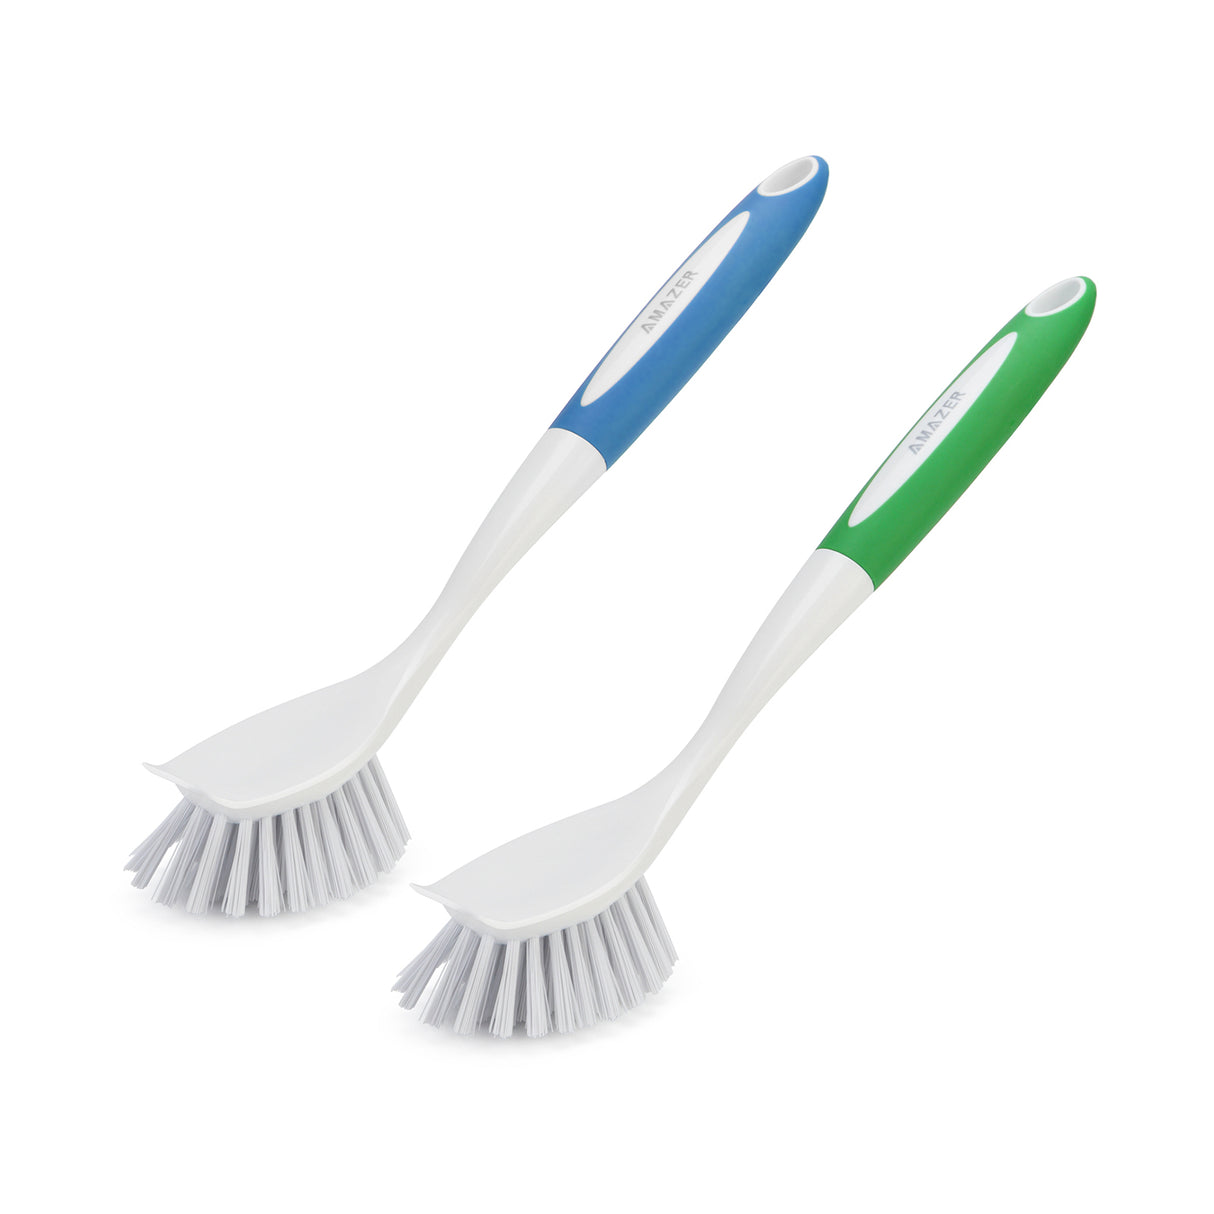 Amazer 2 Pack Dish Brushes with Handle, Kitchen Scrub Brush for Cleaning